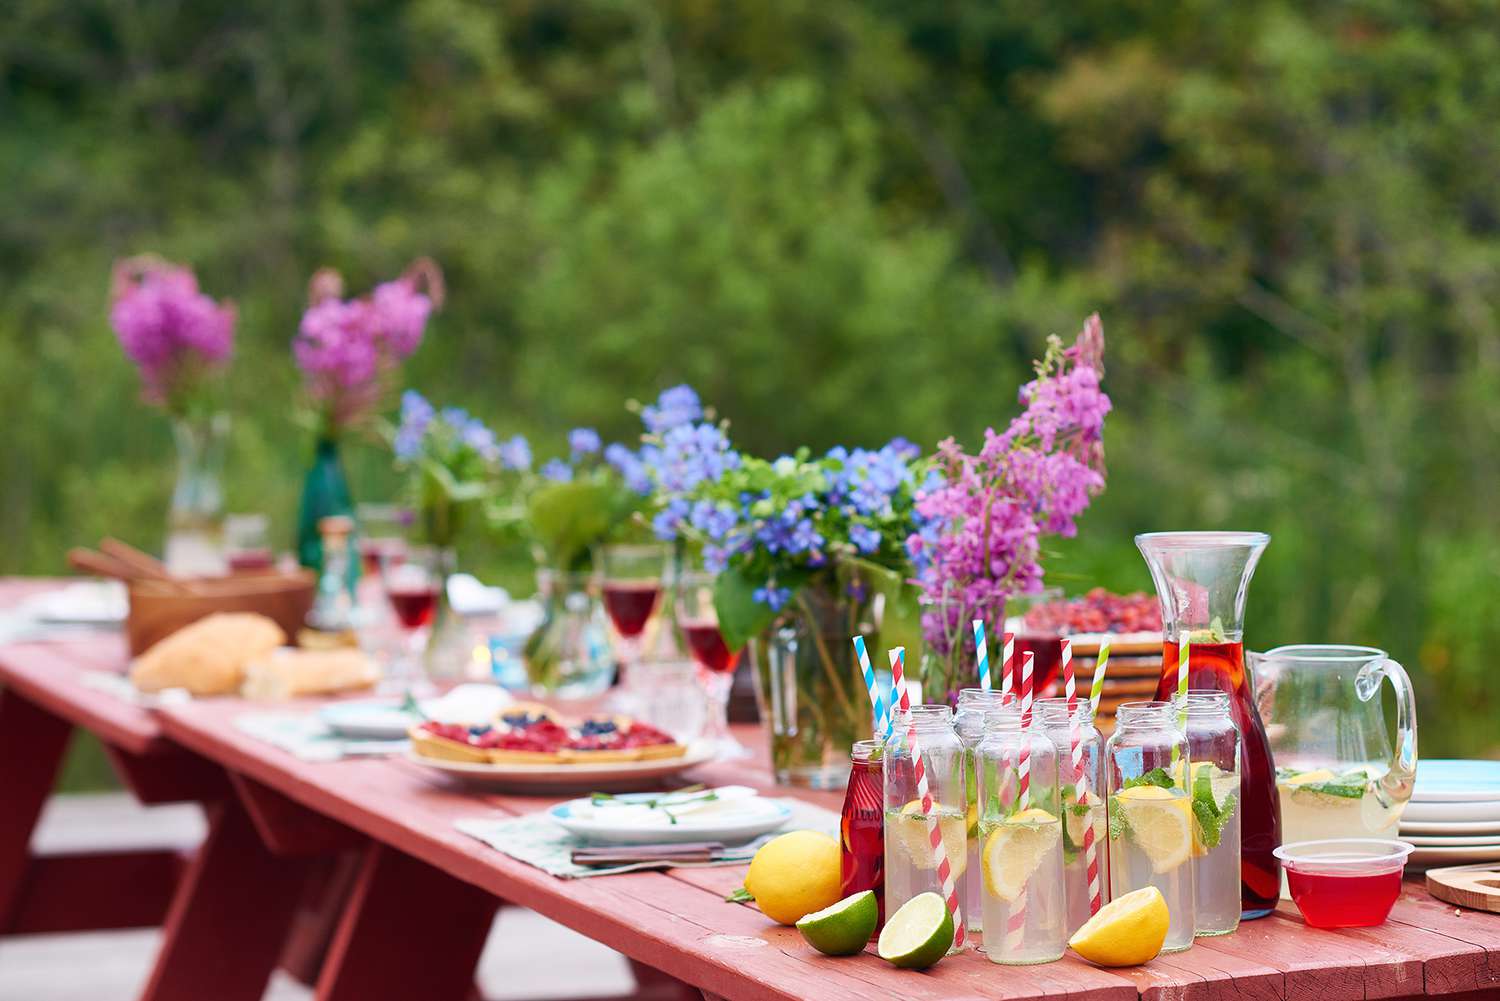 Outdoor party table setting